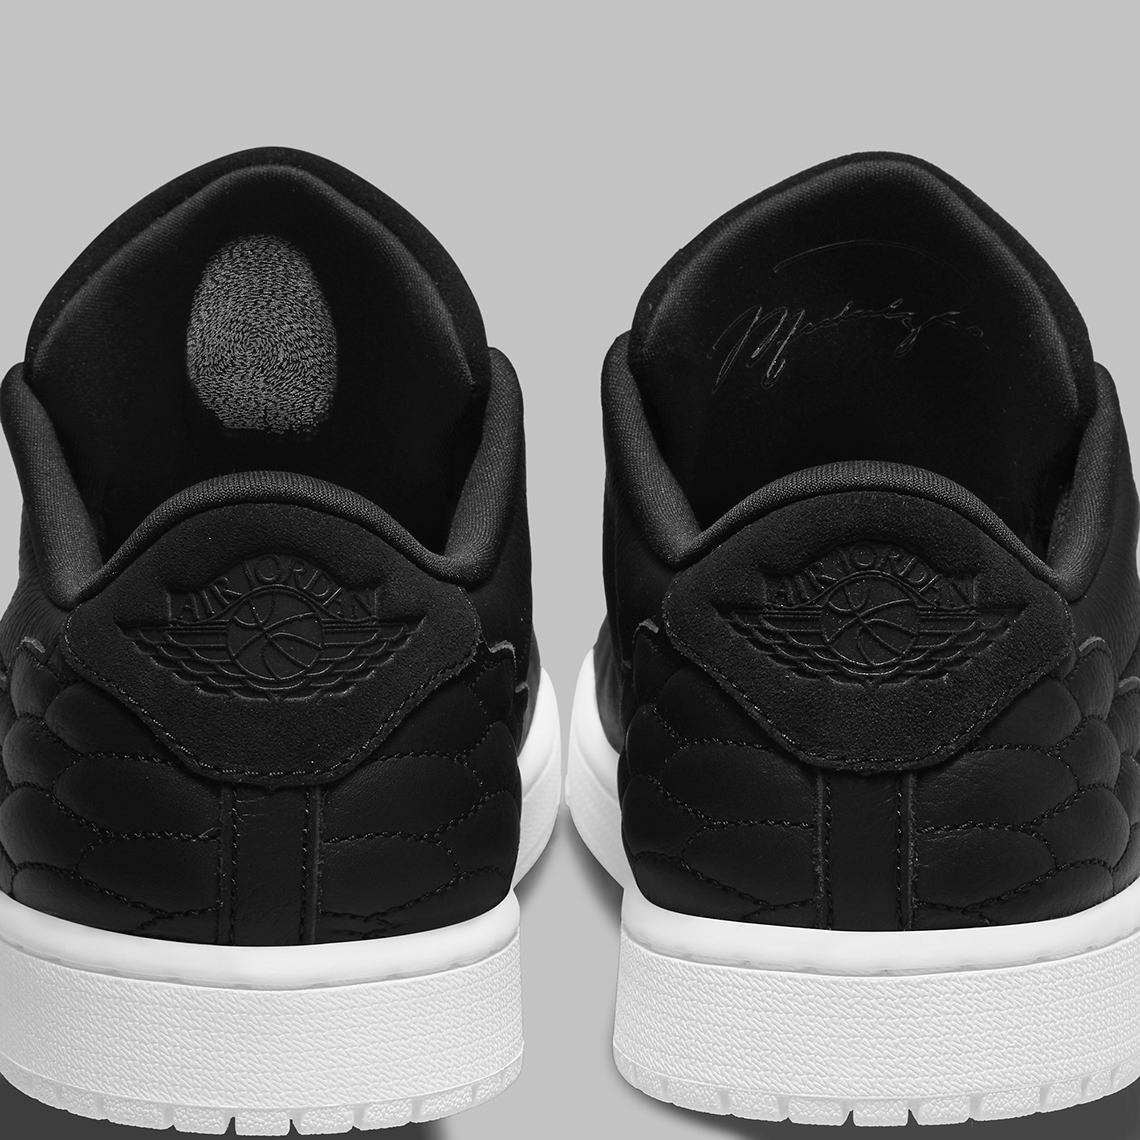 Jordan Brand is taking the "Panda" trend to the golf course with Black White Dj2756 001 5